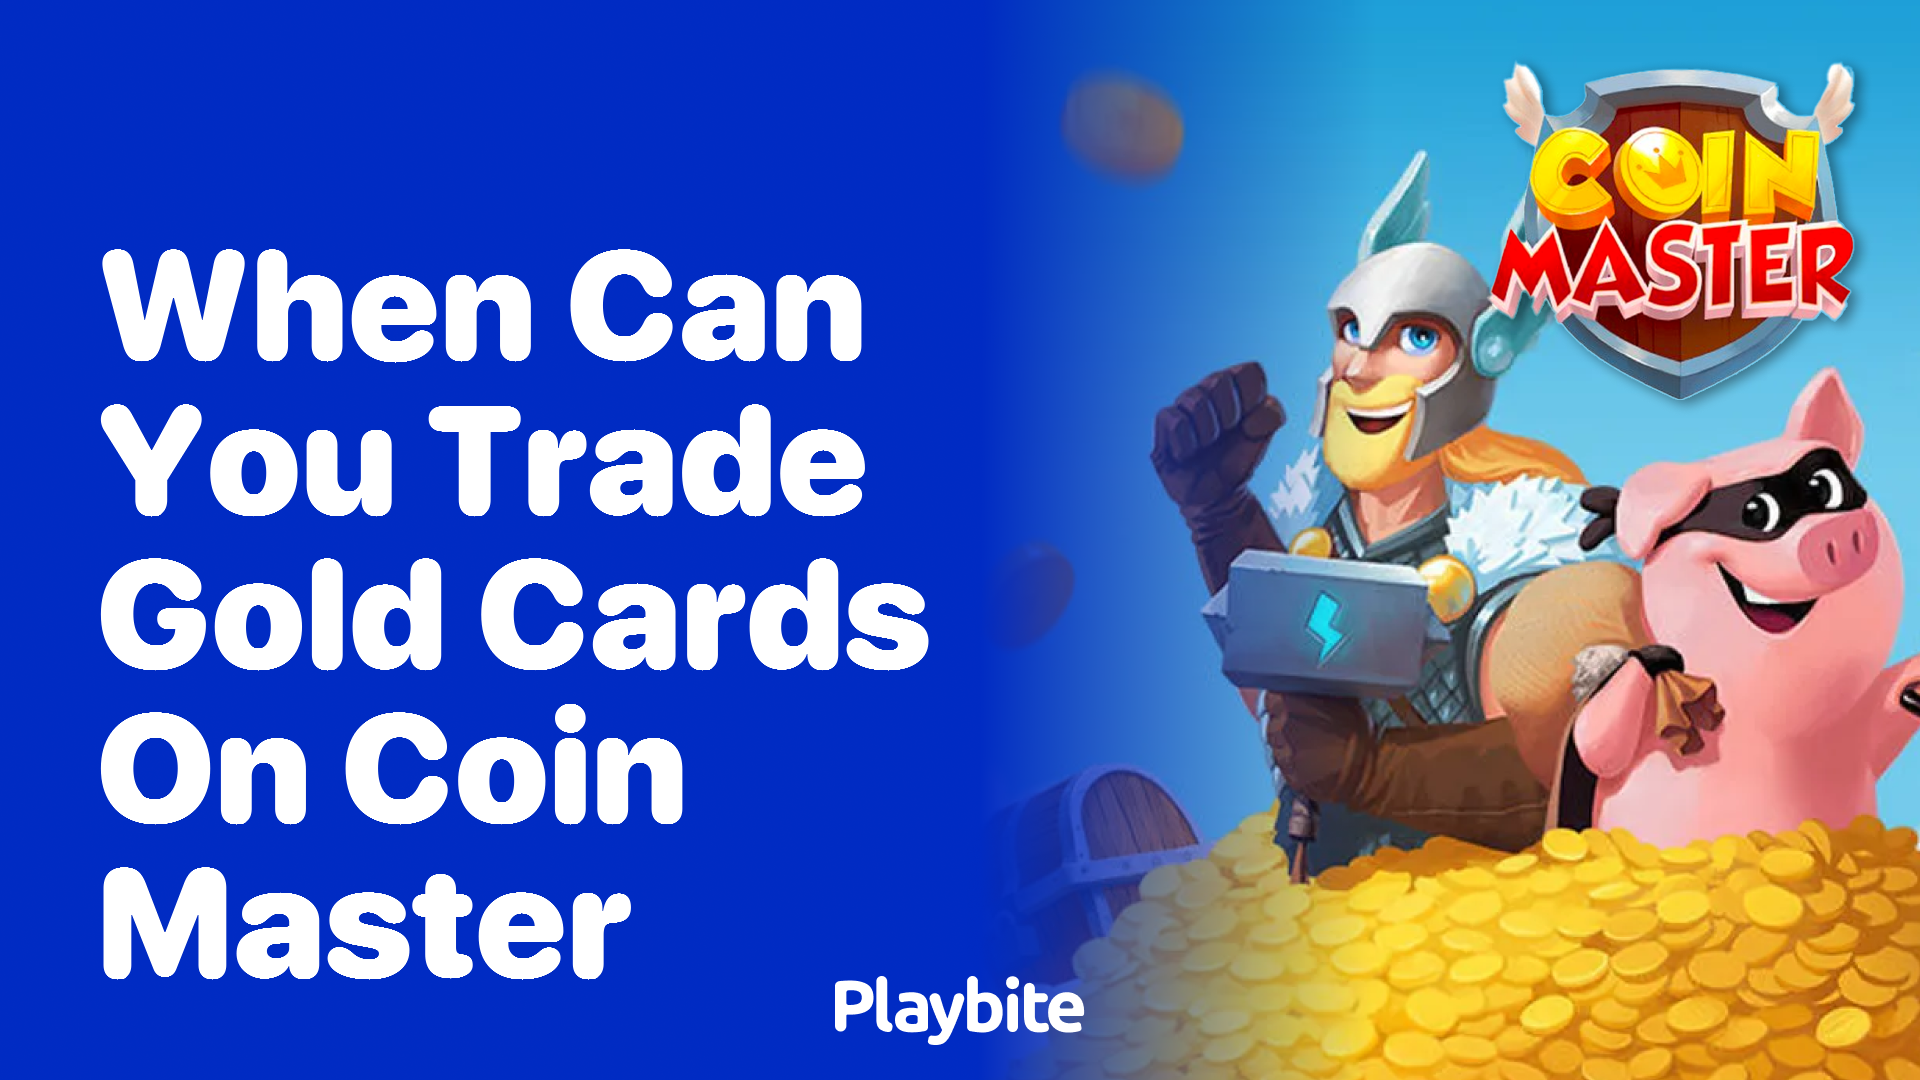 How to send Gold Cards in Coin Master — explained